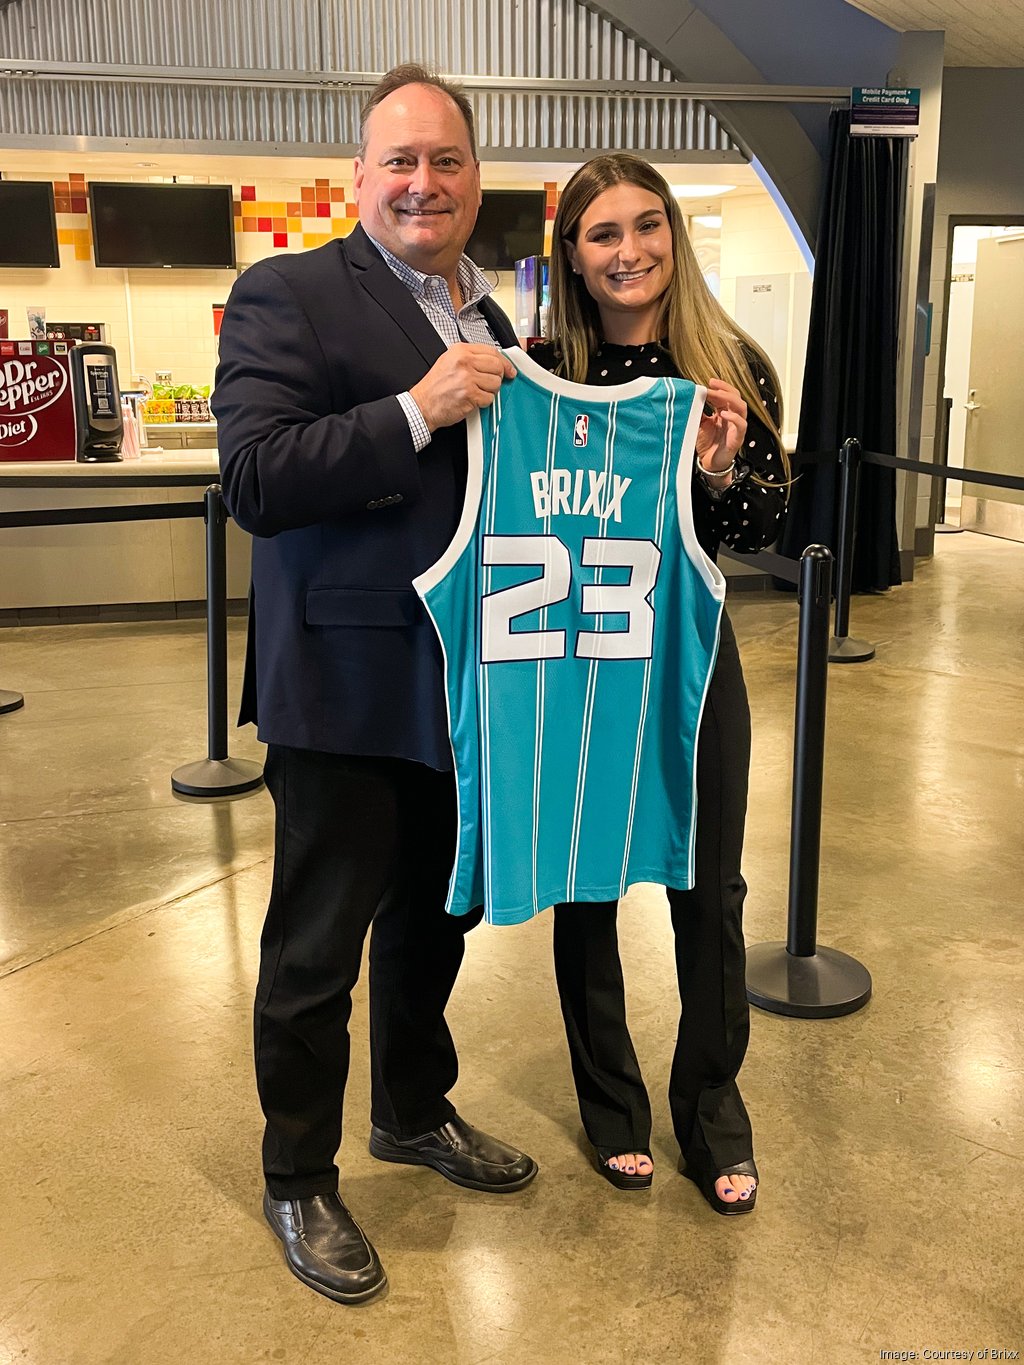 Hornets apparel sales are gaining momentum - Charlotte Business Journal